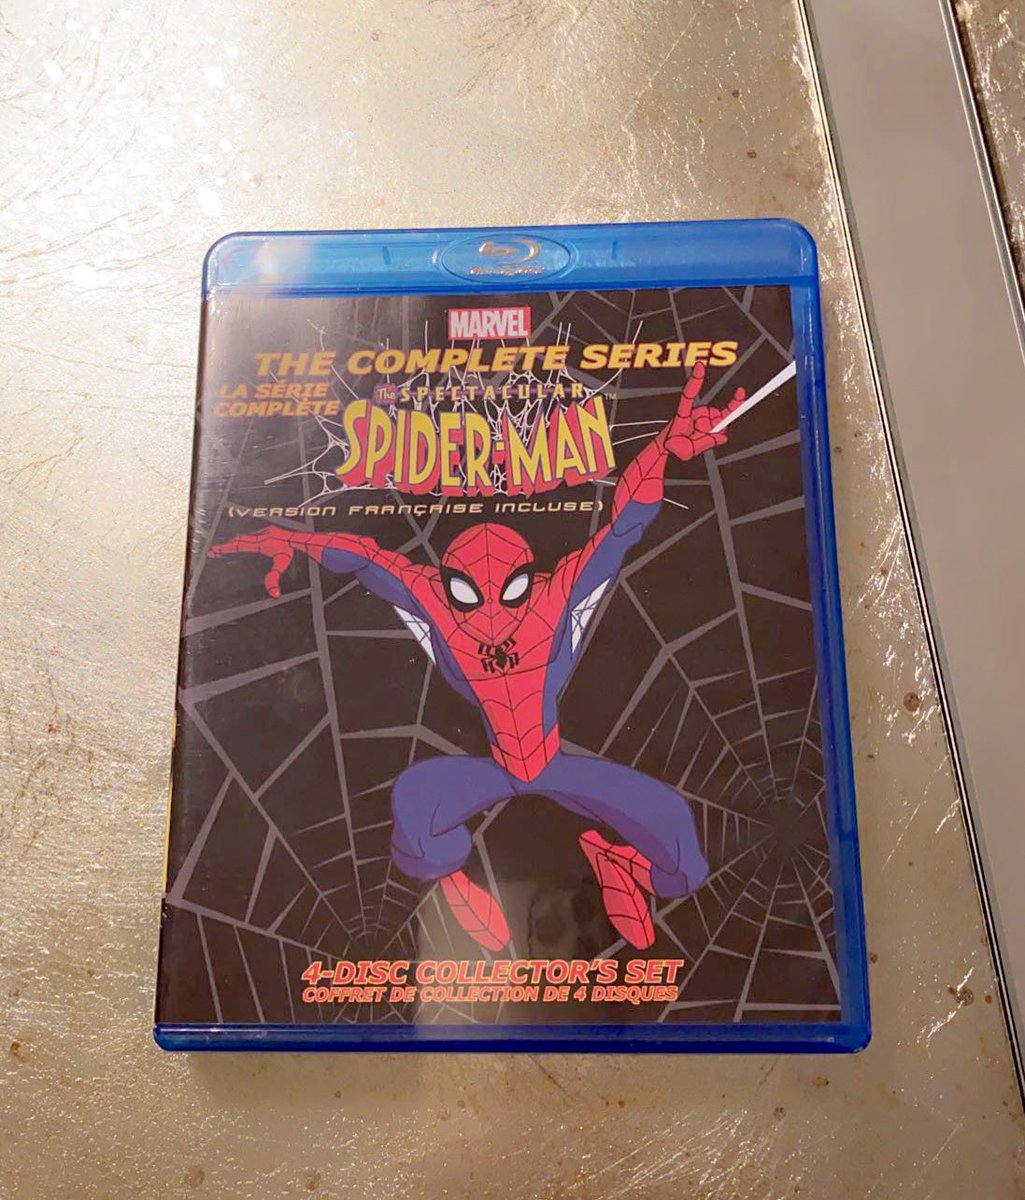 RT @REAL_EARTH_9811: I finally have Spectacular Spider-Man on Blu-Ray!!

#SaveSpectacularSpiderMan https://t.co/6XekL9oKAf